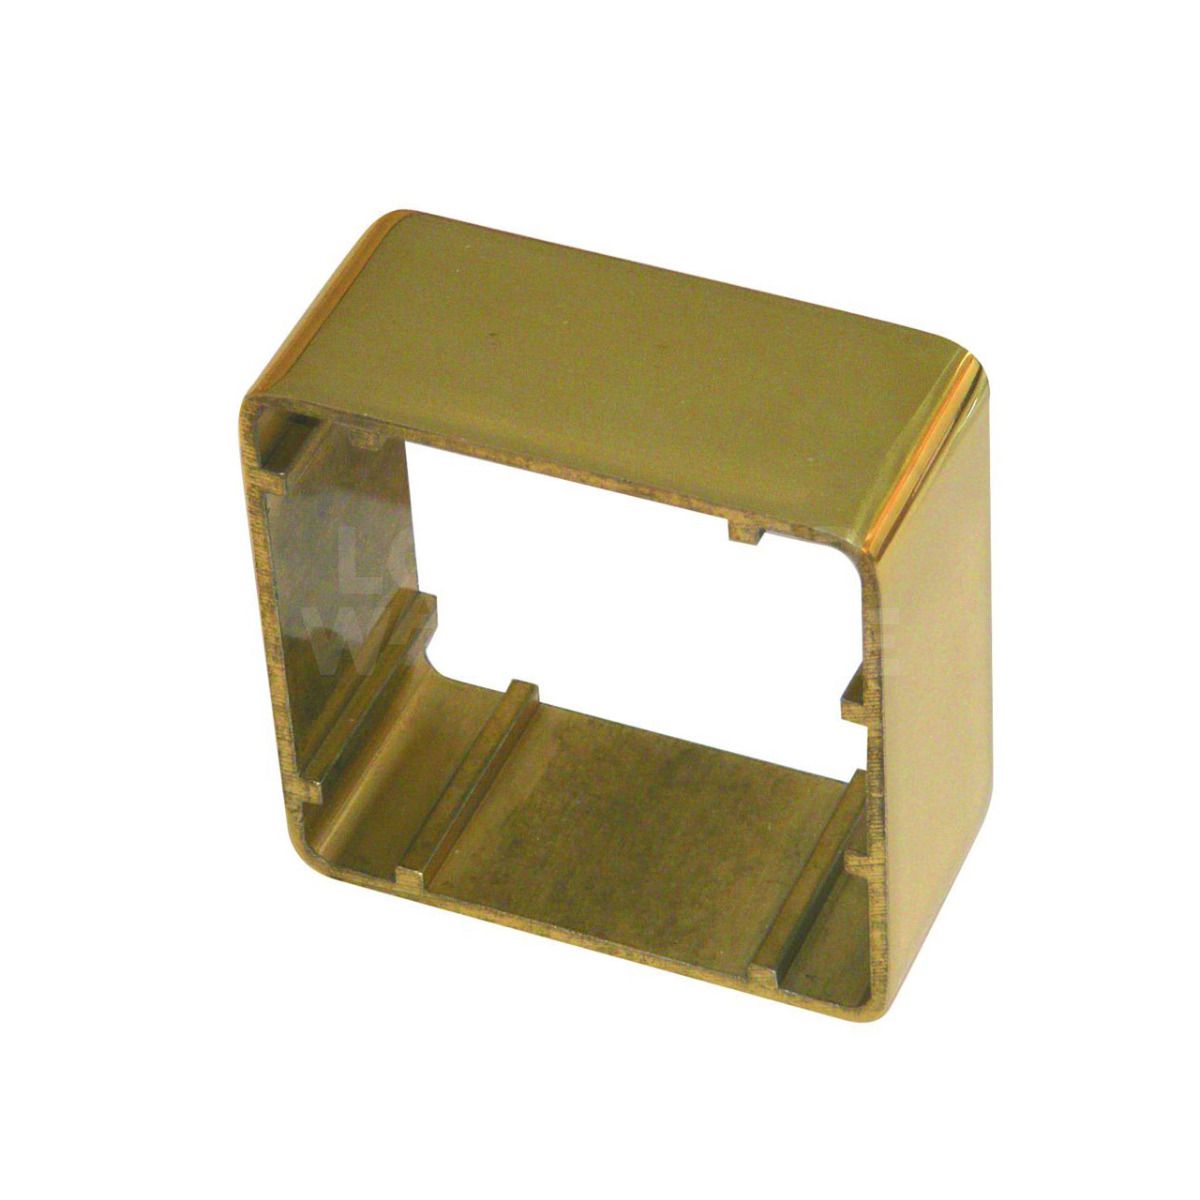 ASEC Brass Surface Housing for Exit Buttons